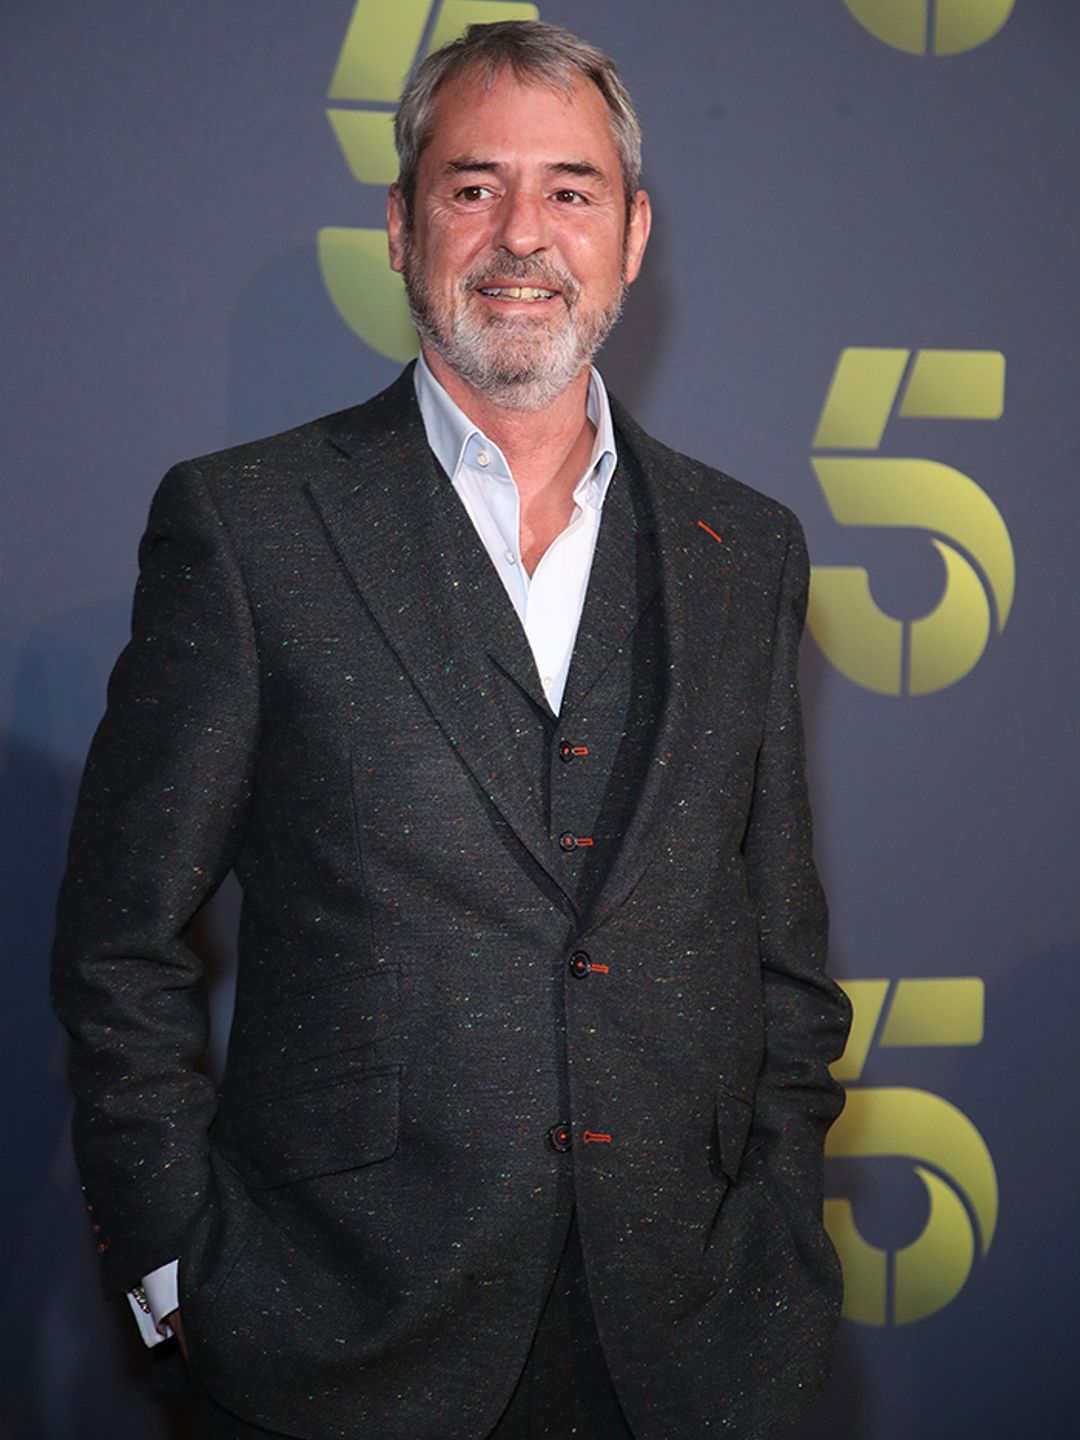 Neil Morrissey at a Channel 5 photocall.